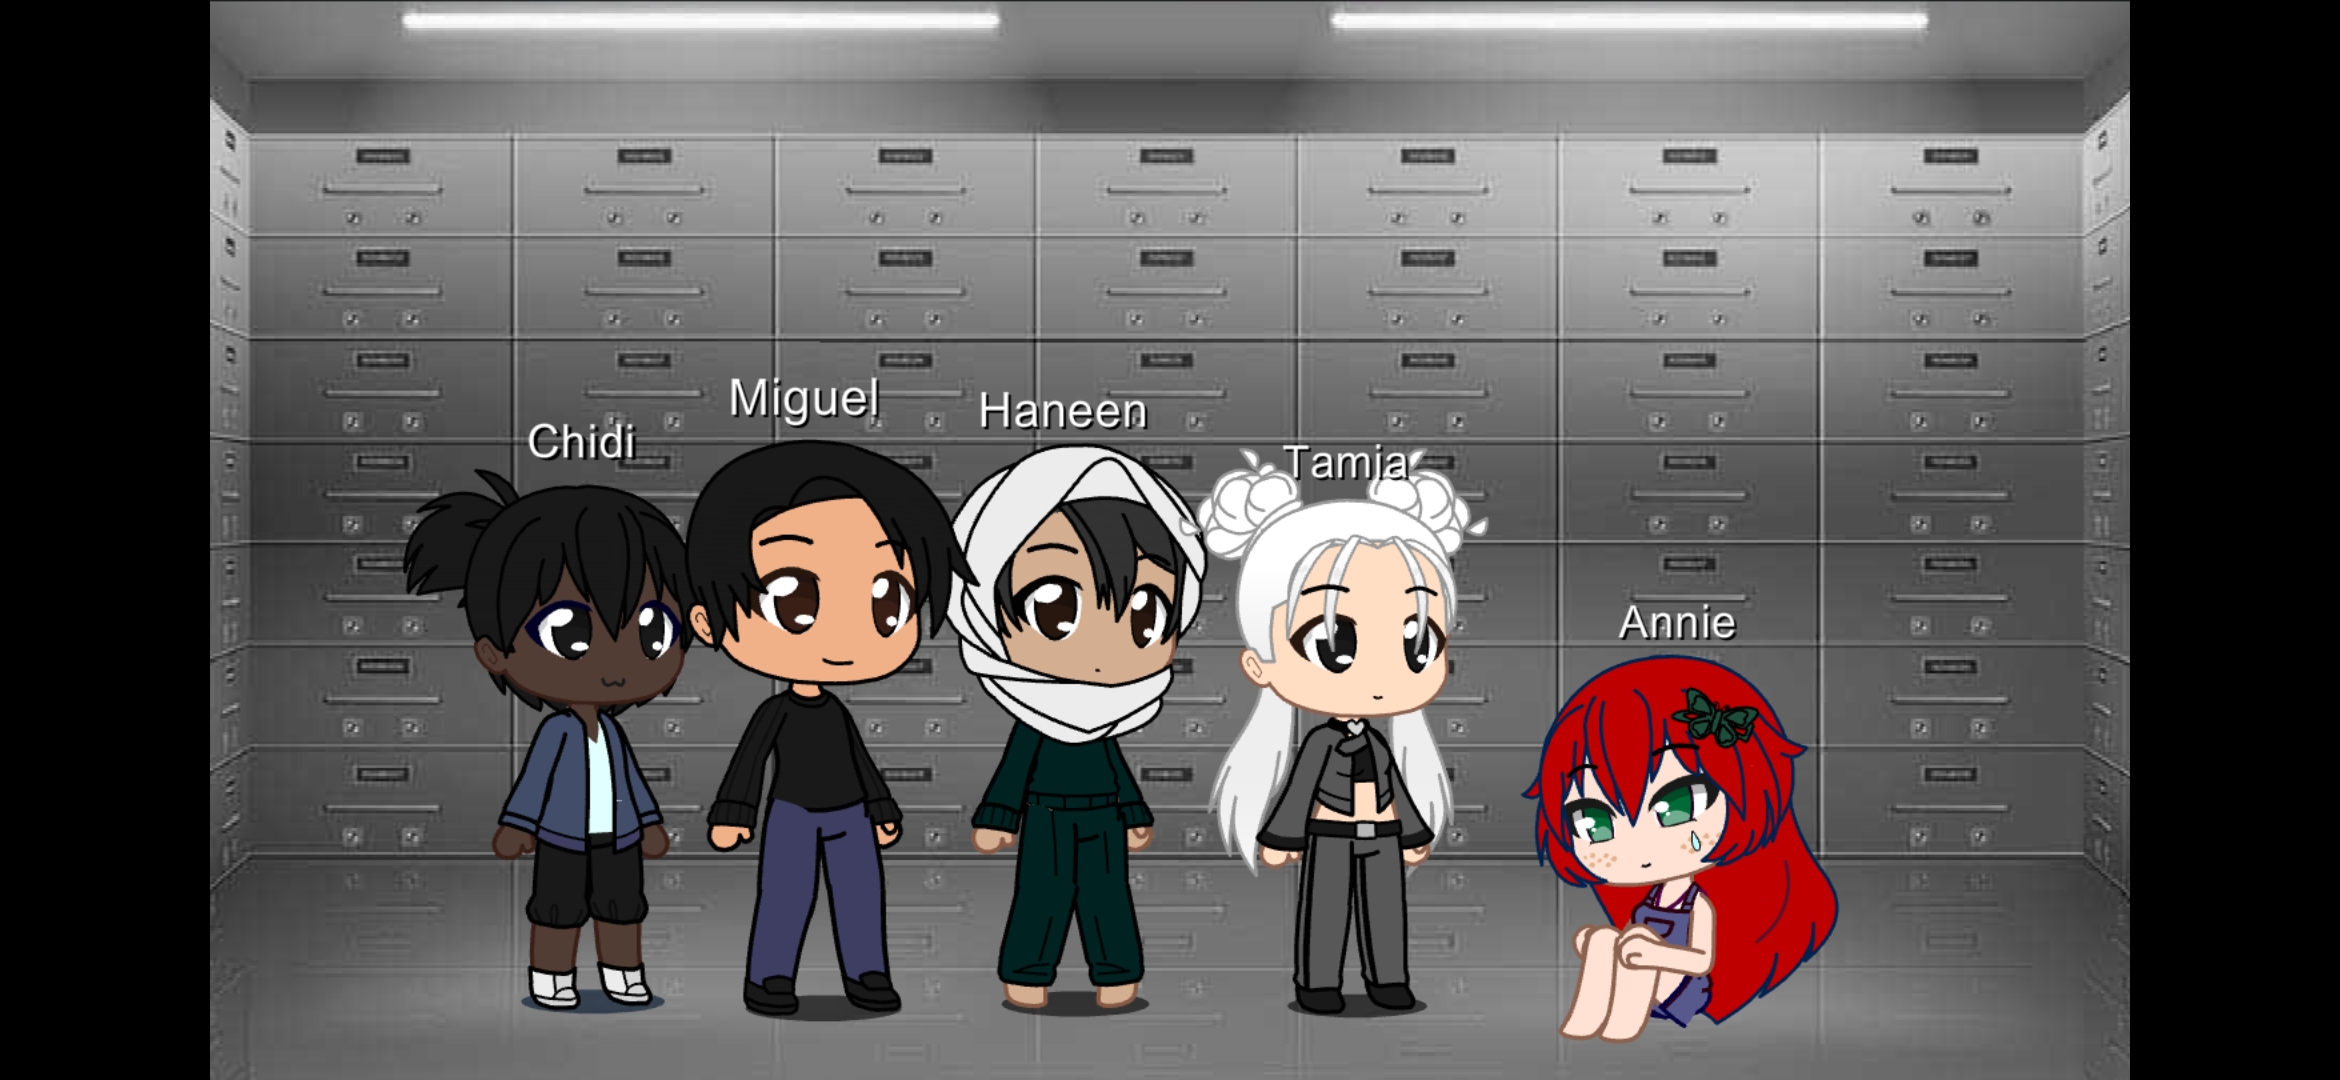 Sigh So I Made Flicker Characters In Gacha Club Fandom - roblox flicker characters gacha life